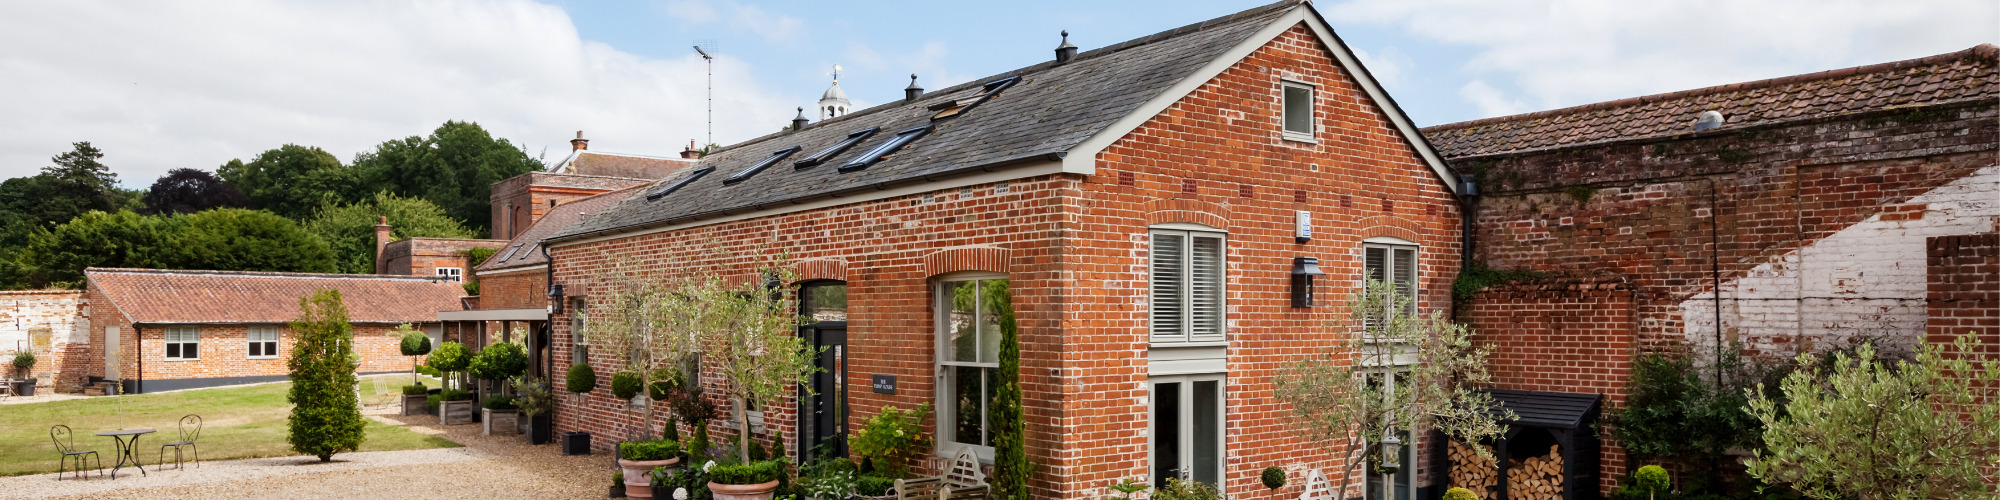 Barn Conversions - A Round Up for Conveyancers